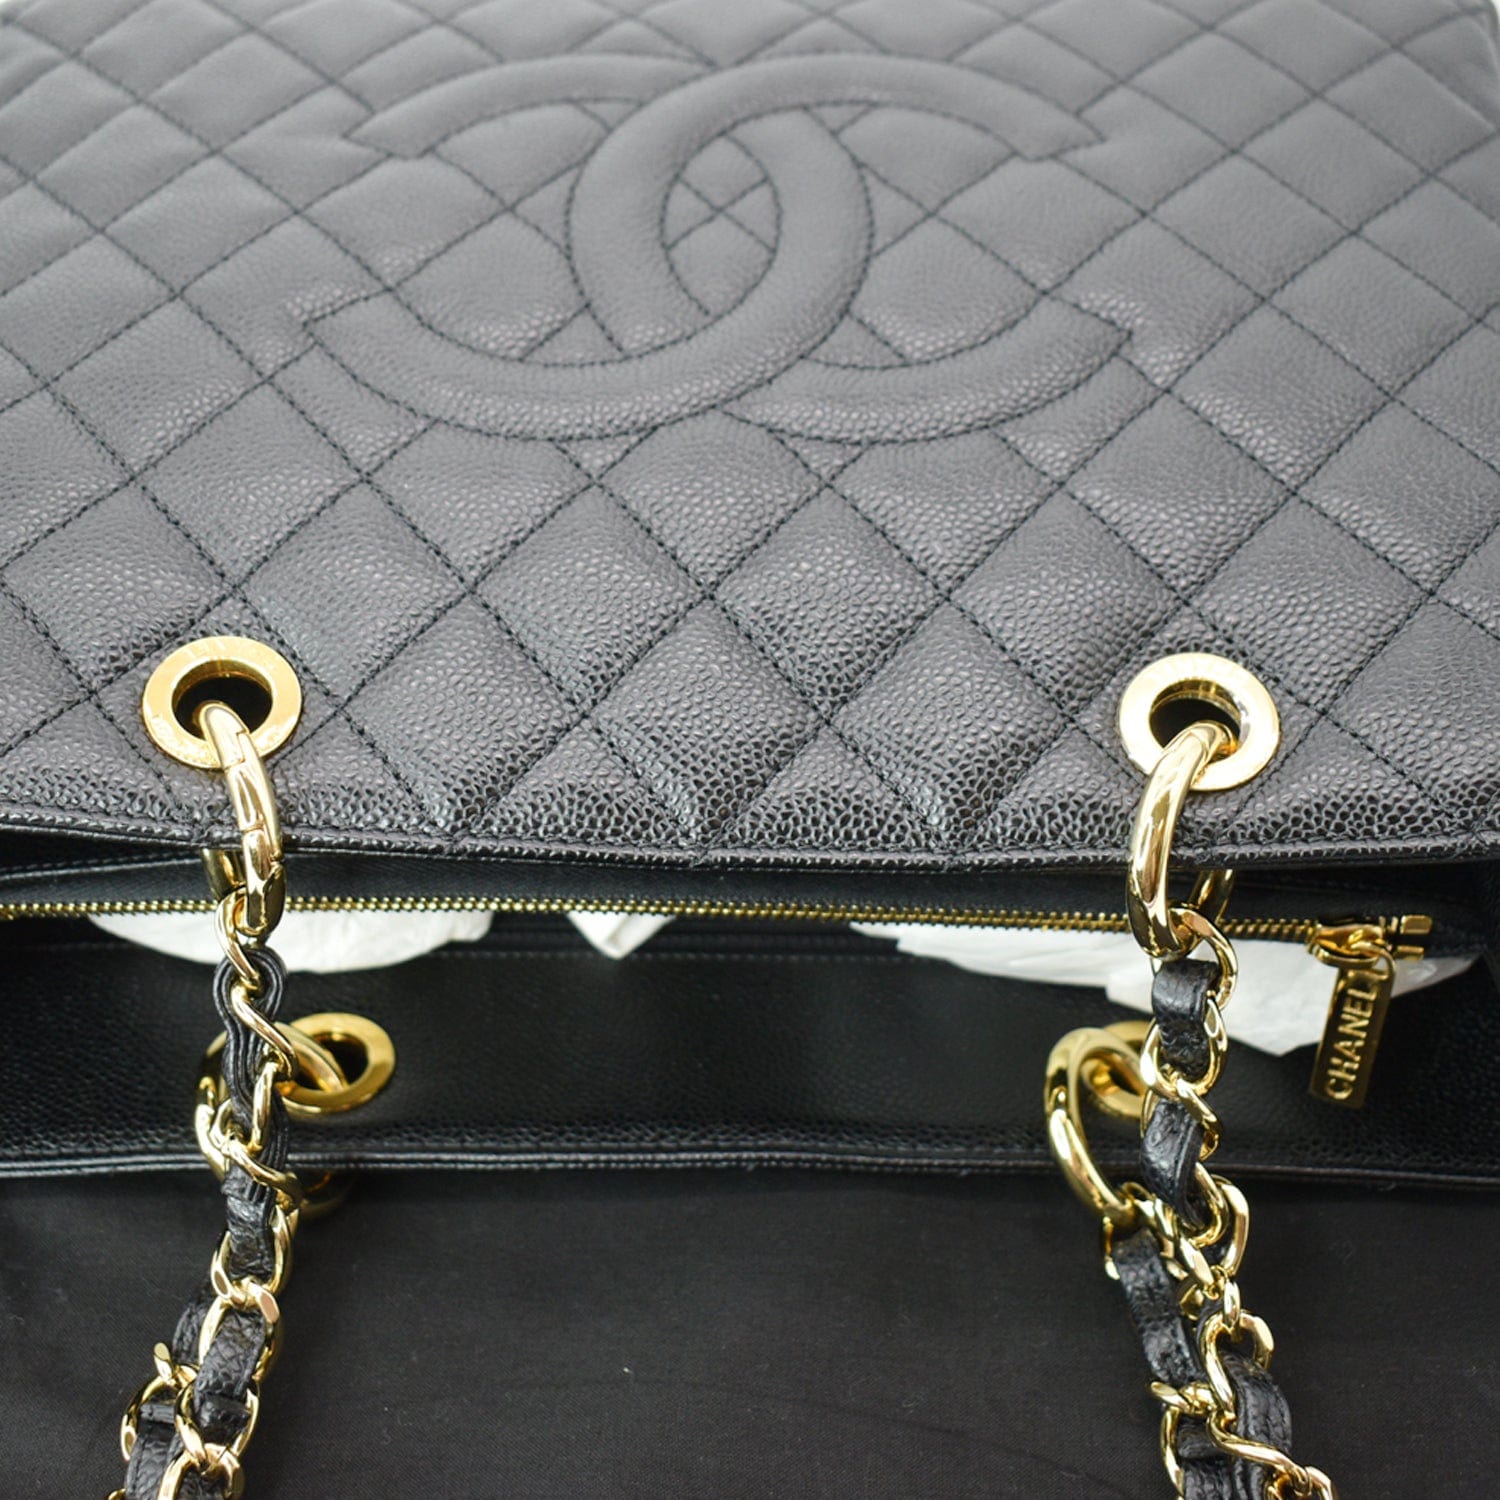 chanel quilted leather purse